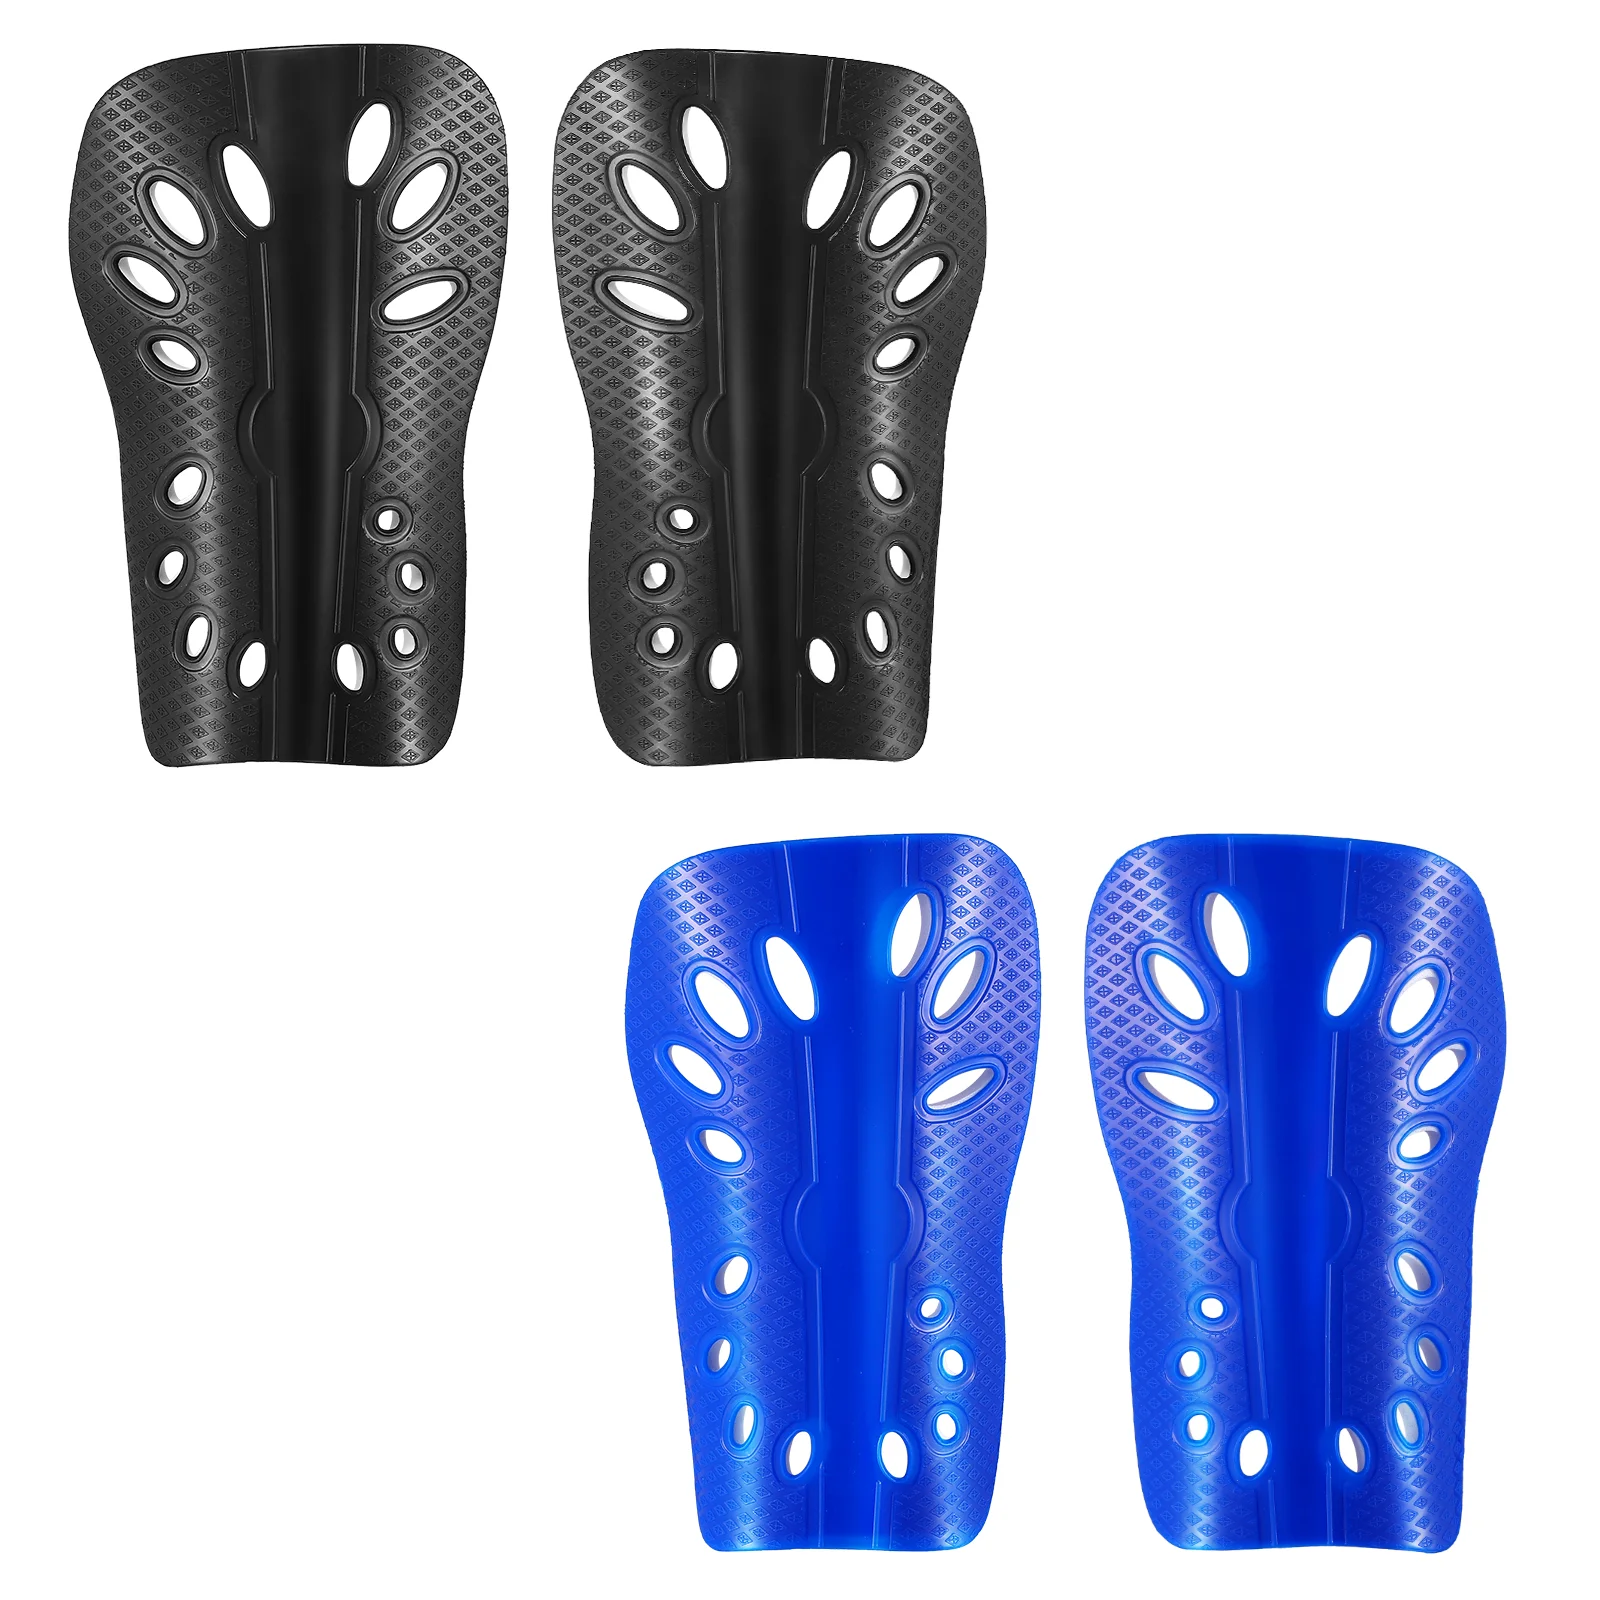 

2 Pairs Football Kids Calf Guard Hockey Protective Gears Shin Boards Soccer Guards Braces Child